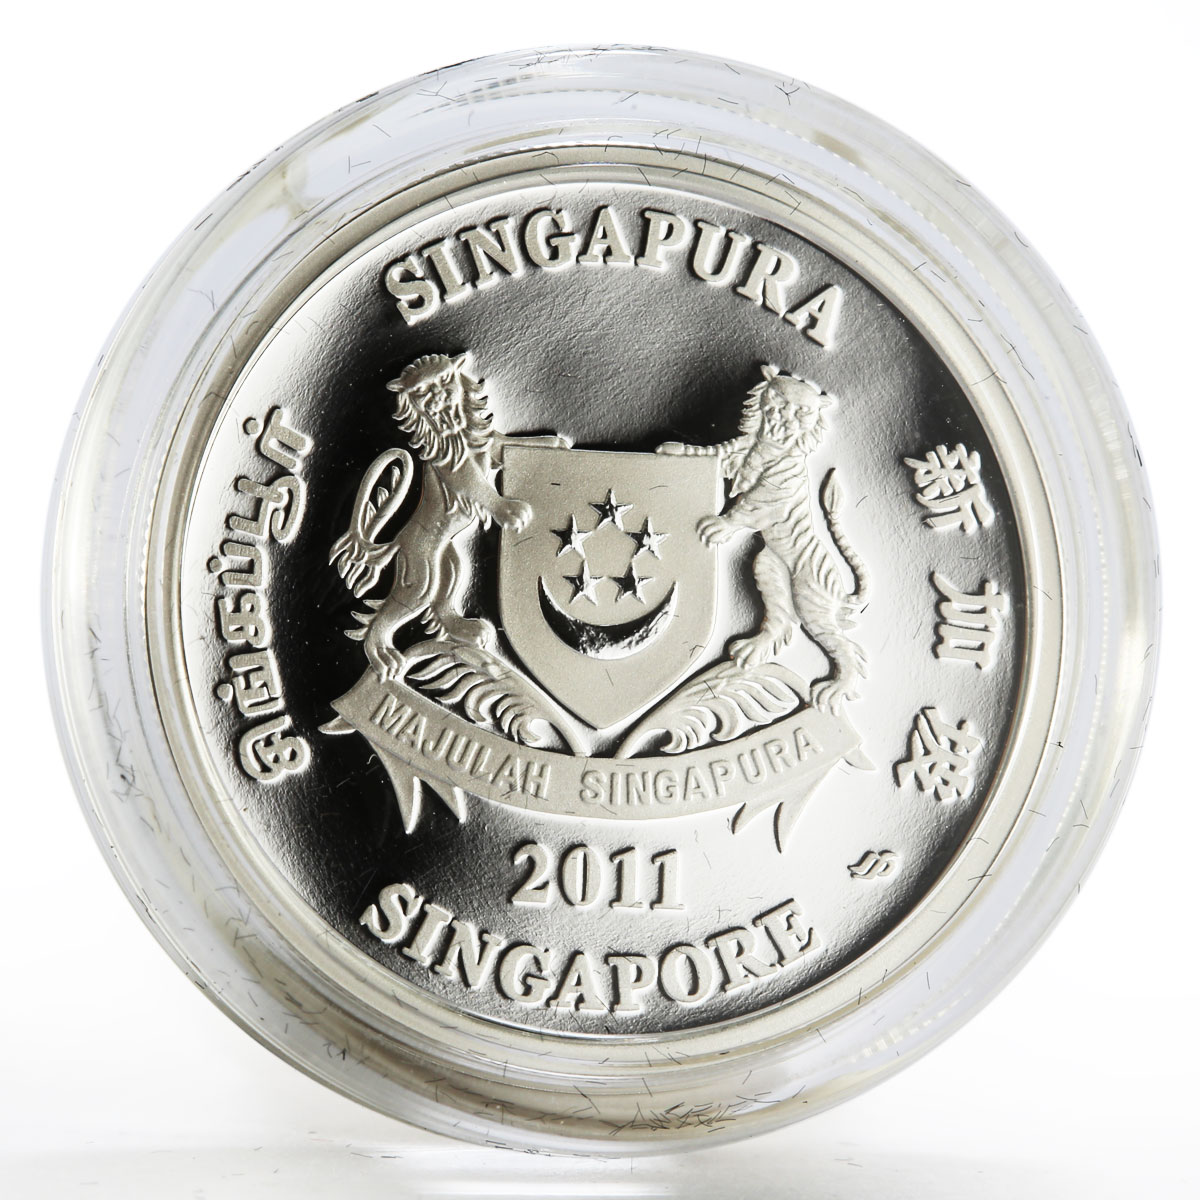 Singapore 1 dollar Dendrobium Singa Mas Orchid colored proof silver coin 2011